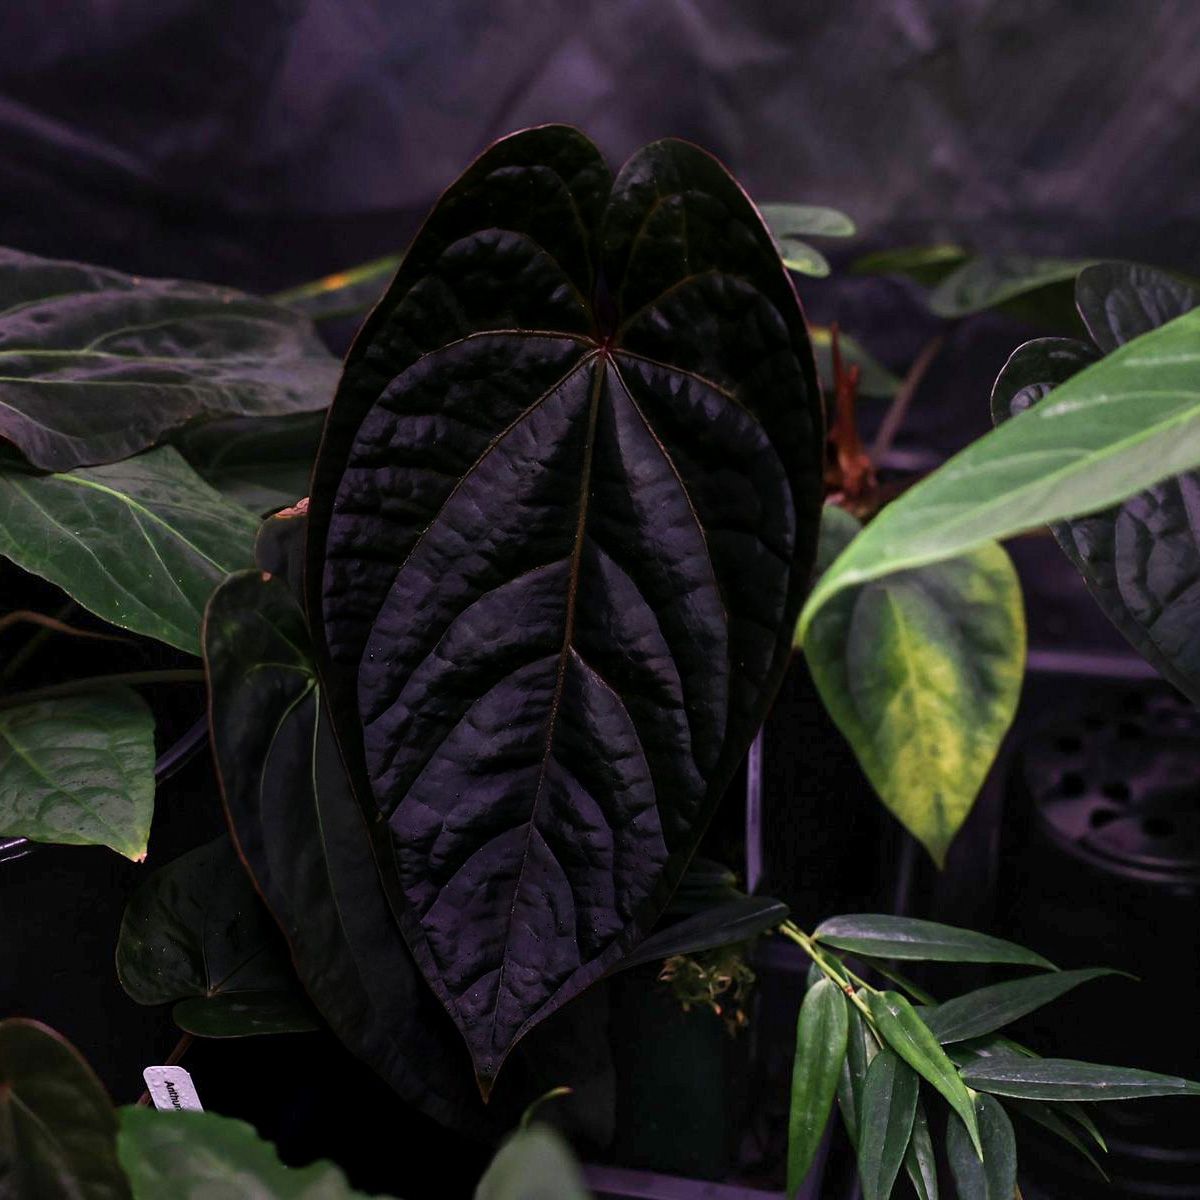 MonsteraX World S Plant Marketplace Official Home For Rare Variegated Plant Enthusiasts